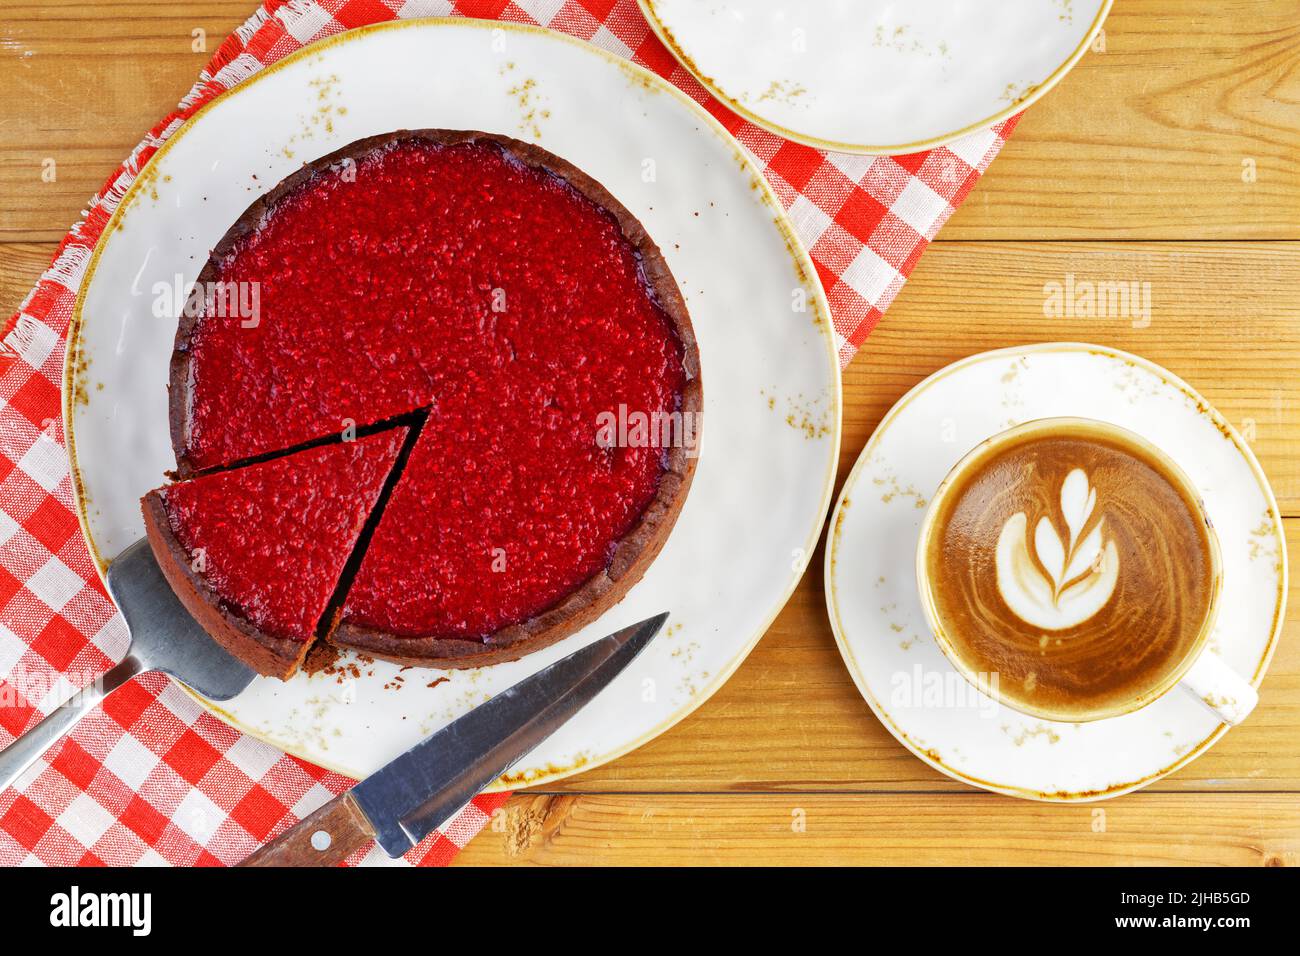 Homemade raspberry and strawberry cheesecake and cup of coffee cappuccino on wooden table. Top view. Stock Photo